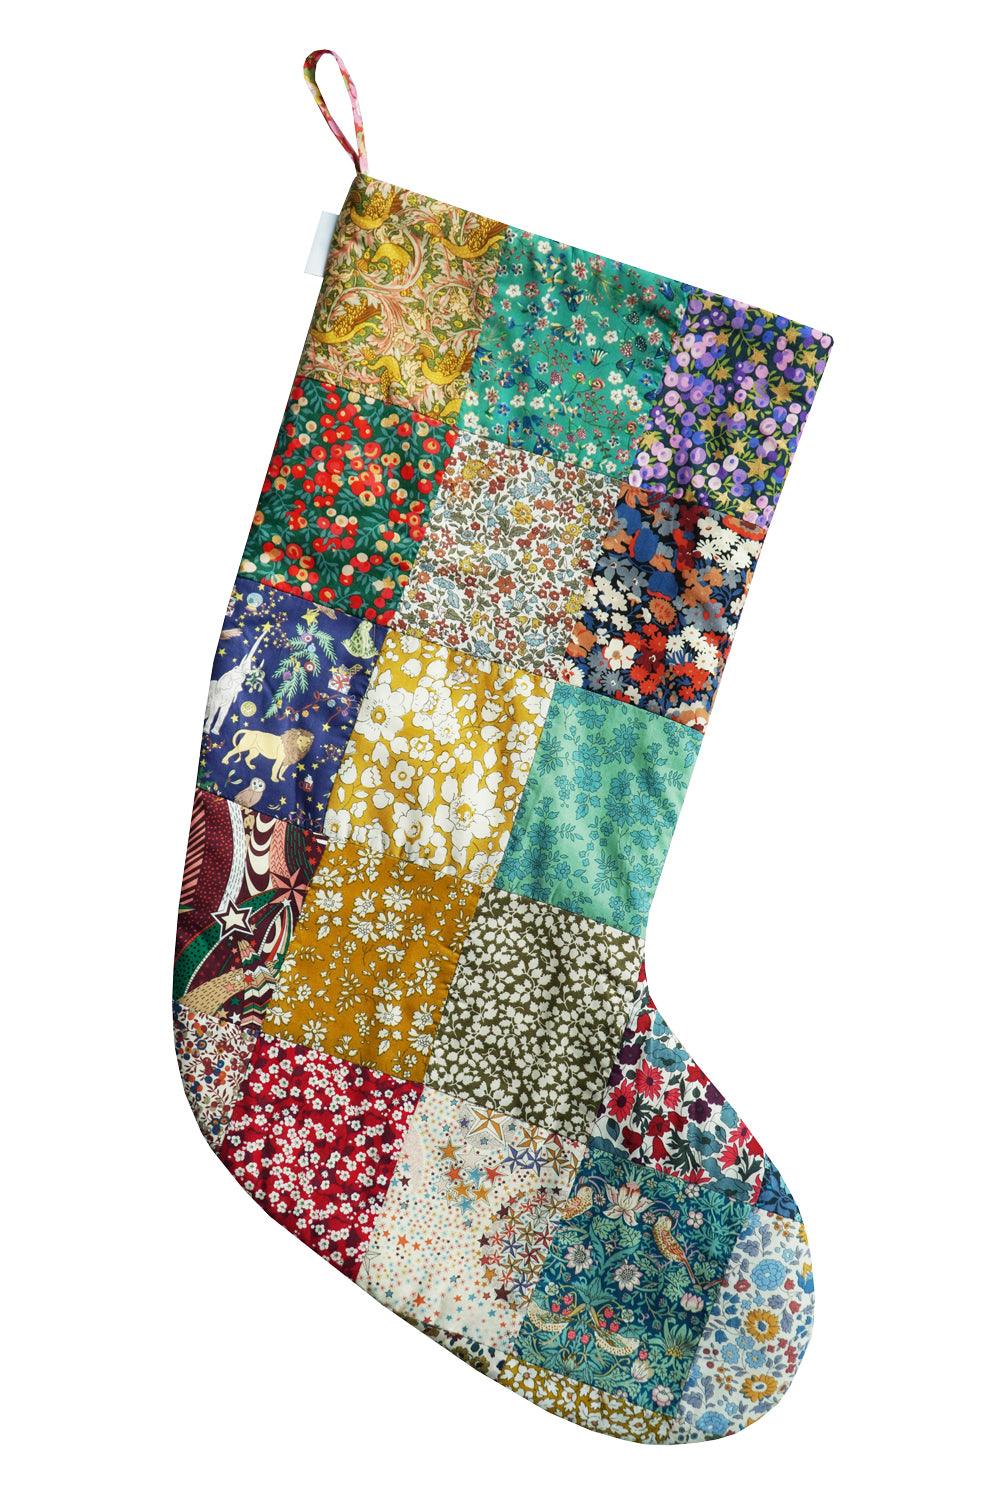 Patchwork Christmas Stocking made with Liberty Fabric - Coco & Wolf